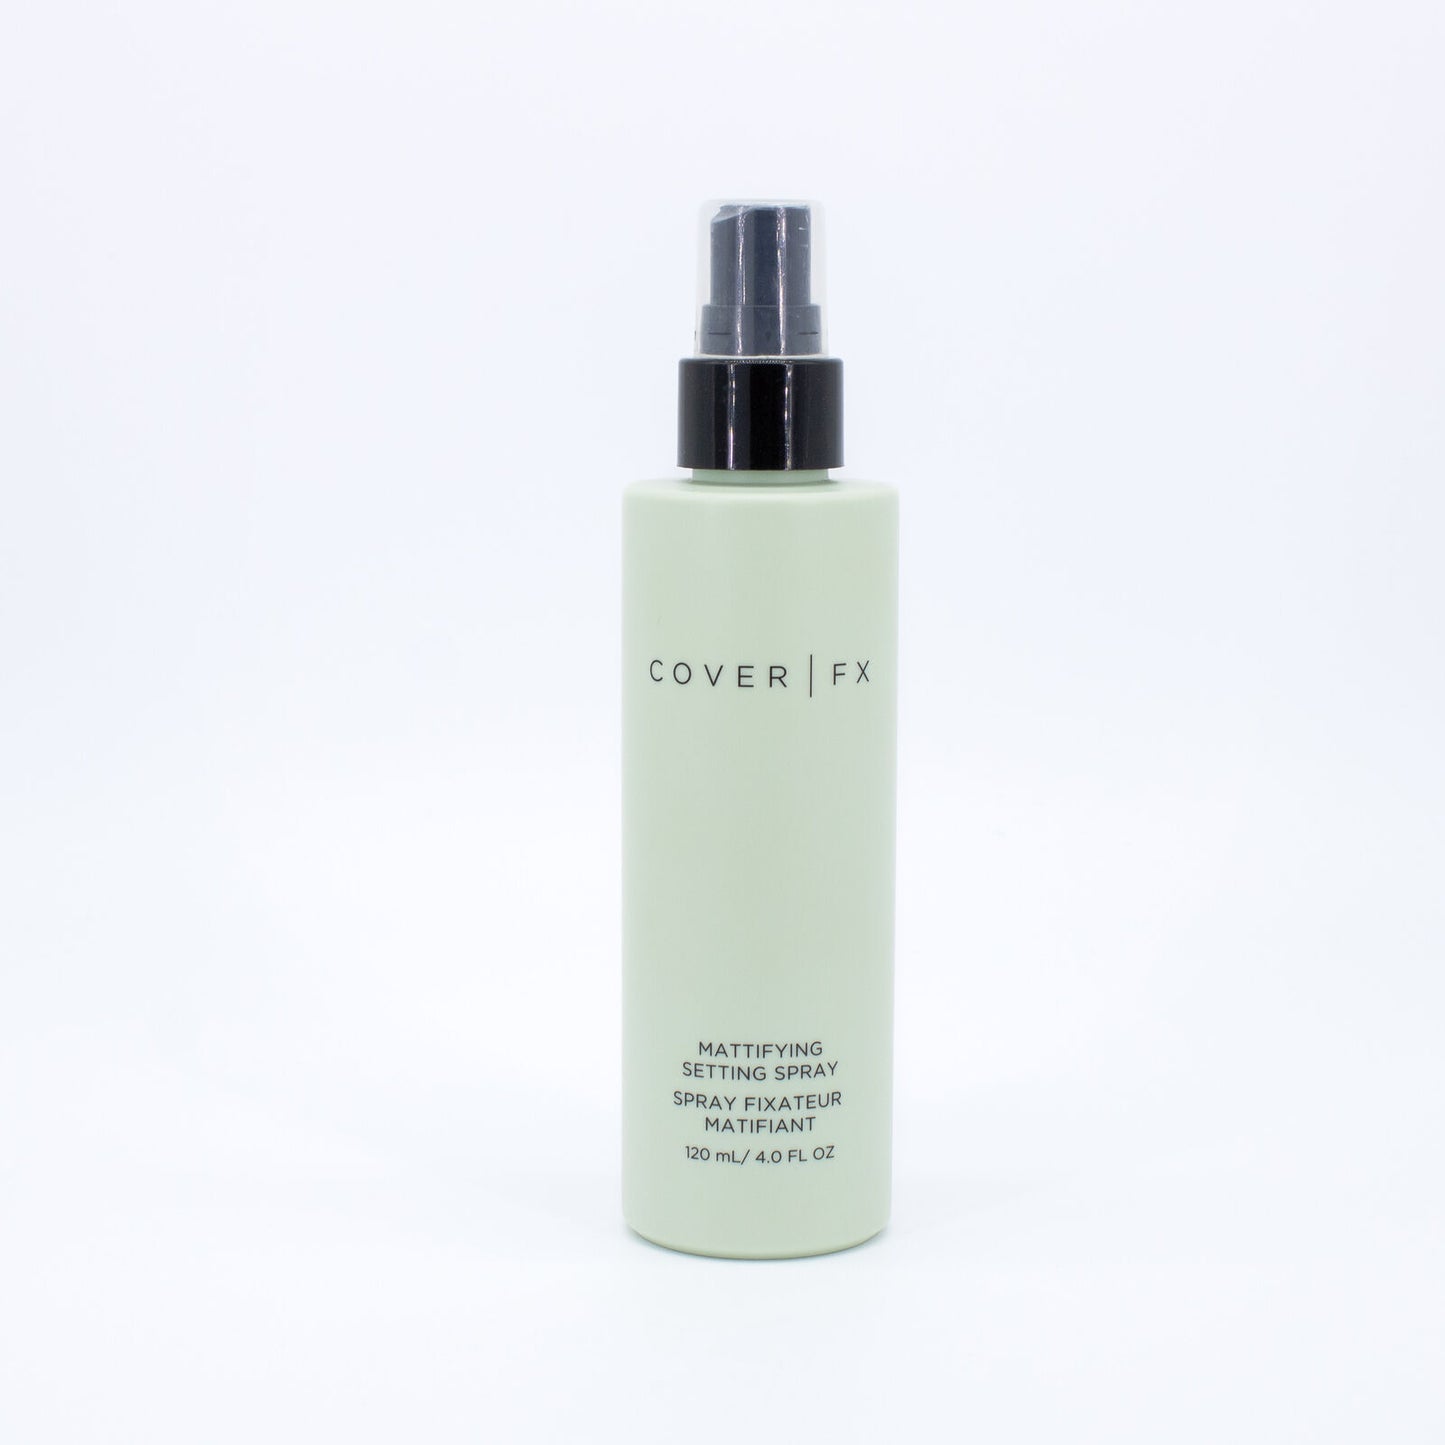 COVER FX Mattifying Setting Spray 4oz - Small Amount Missing